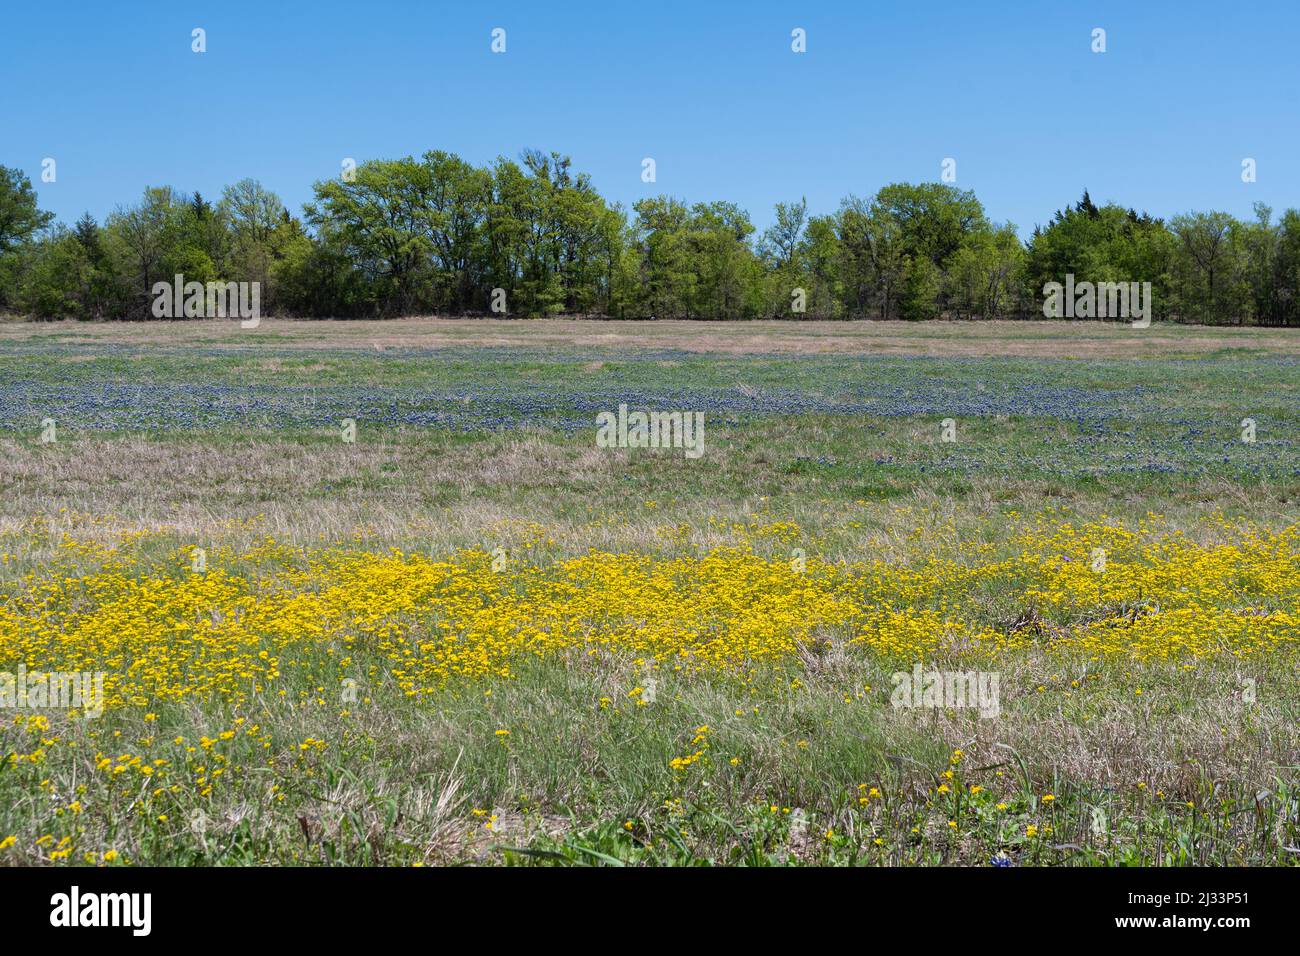 Hillside meadow covered in a blanket of bright yellow Yellowstar flowers in the foreground and beautiful Bluebonnet flowers in the background and a ro Stock Photo